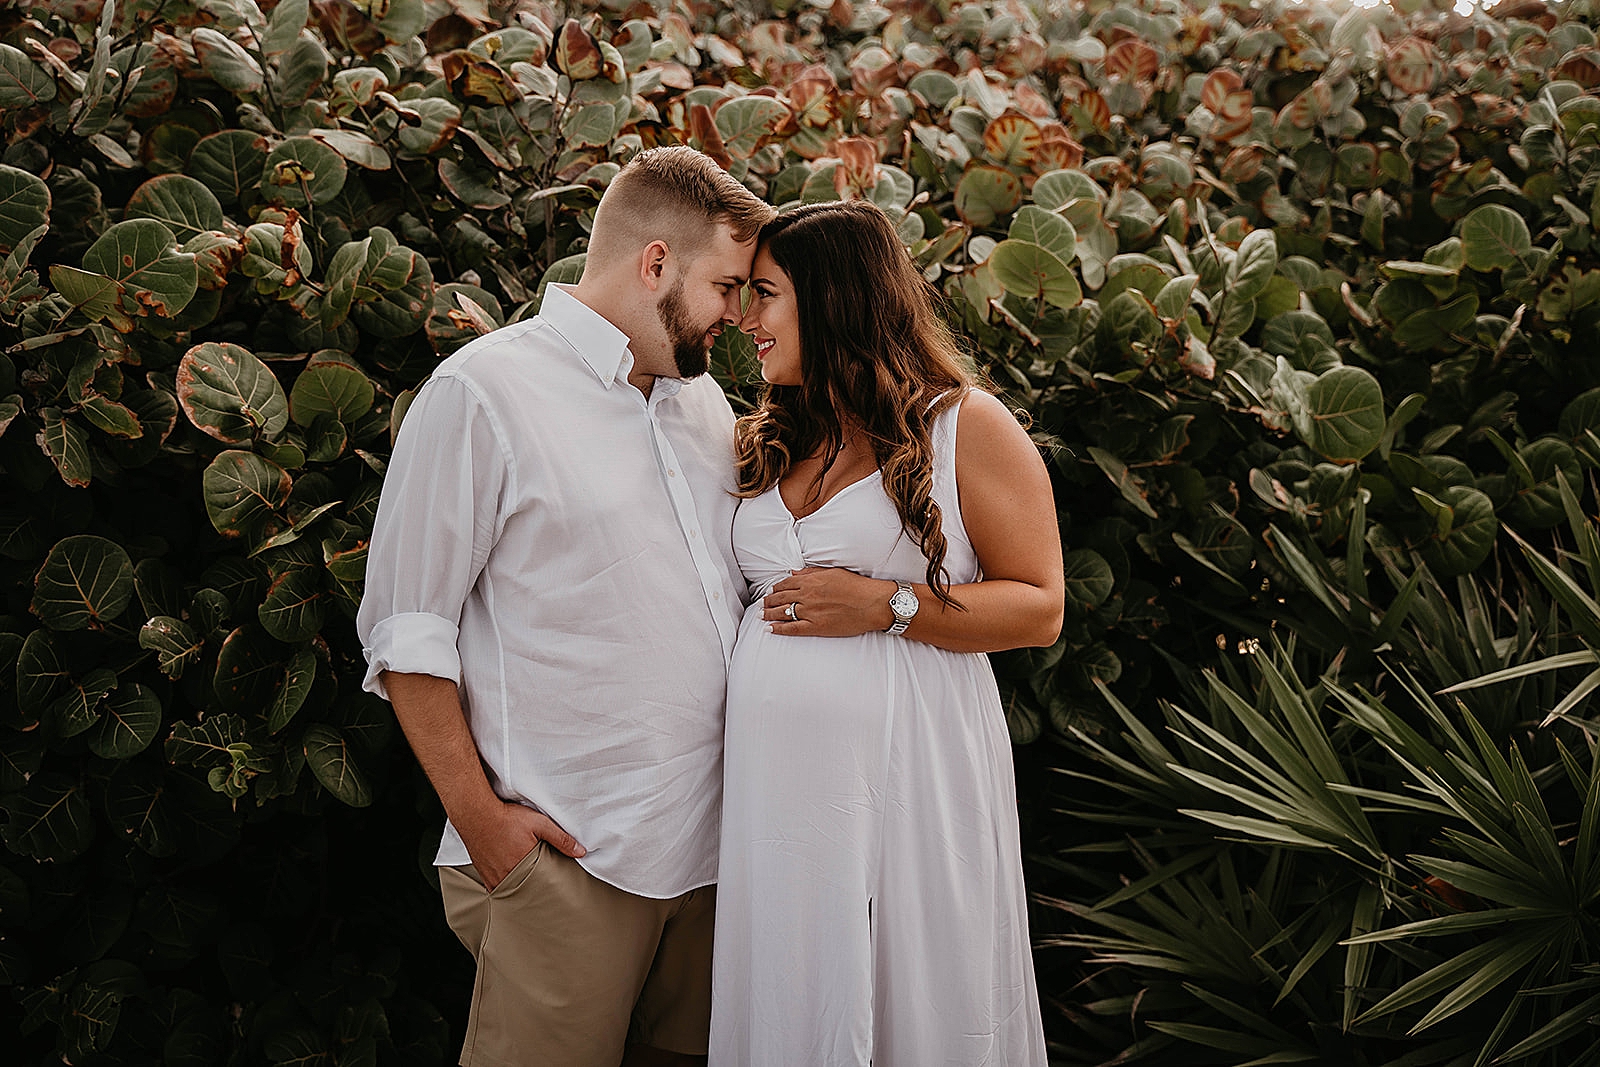 Stunning Palm Beach Maternity Photos captured by South Florida Maternity Photographer, Krystal Capone Photography